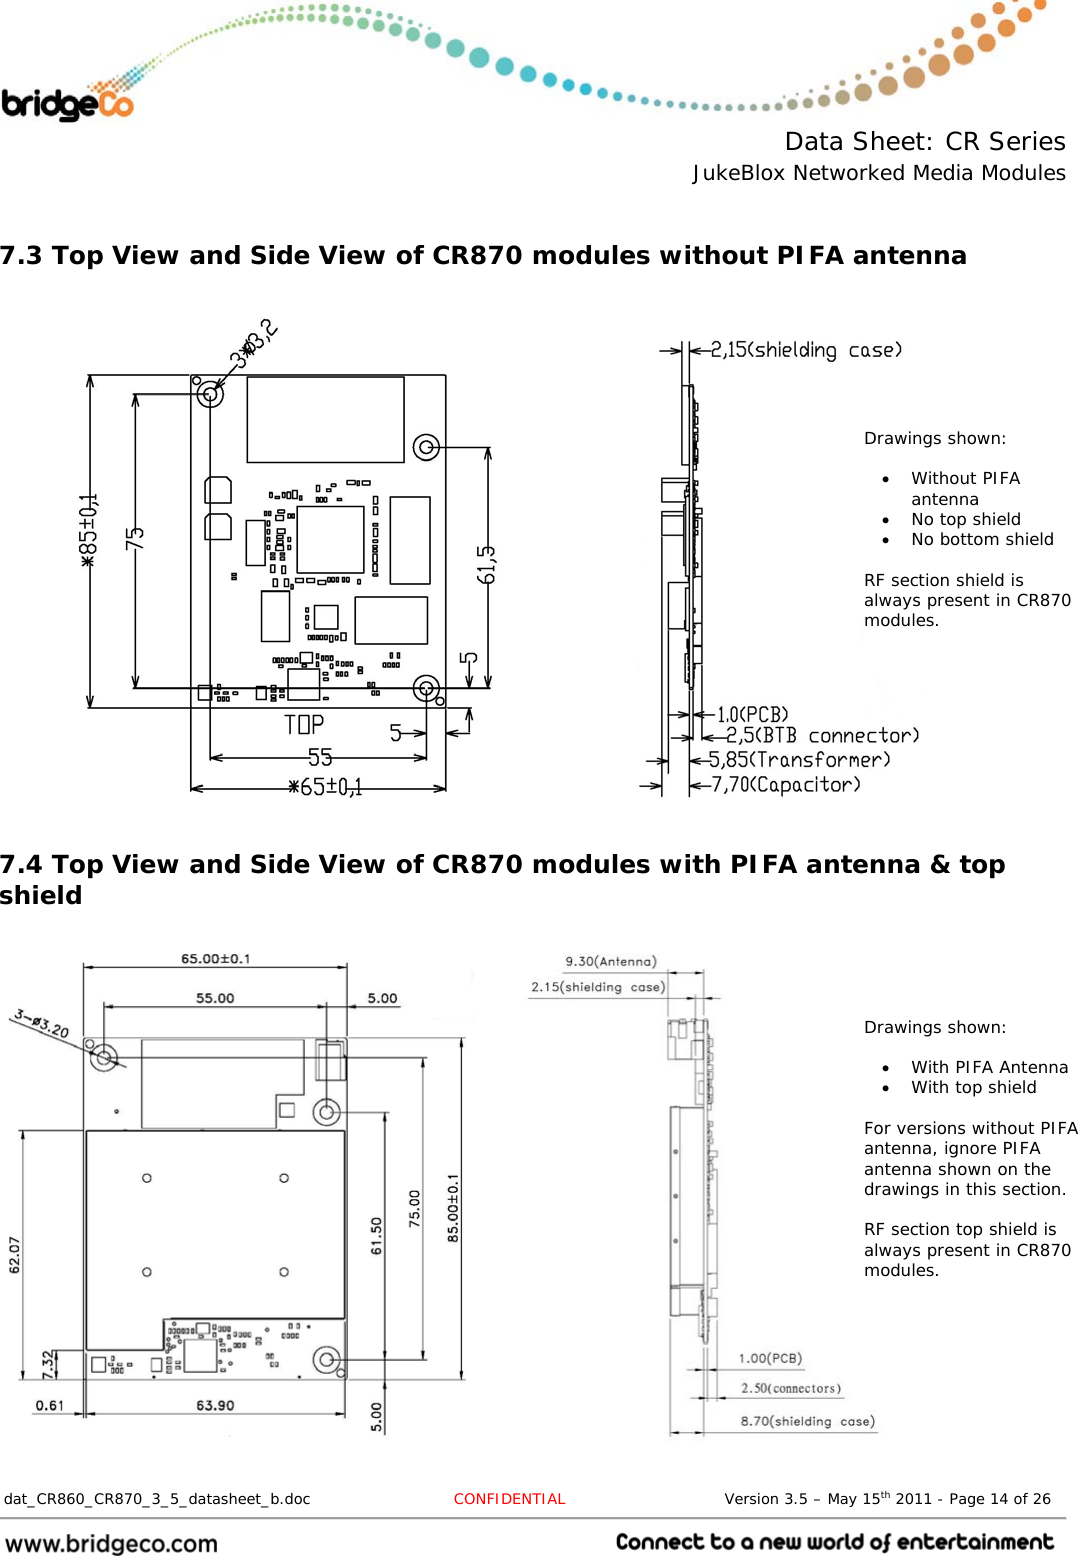  Data Sheet: CR Series JukeBlox Networked Media Modules  dat_CR860_CR870_3_5_datasheet_b.doc   CONFIDENTIAL                               Version 3.5 – May 15th 2011 - Page 14 of 26                                  7.3 Top View and Side View of CR870 modules without PIFA antenna                       7.4 Top View and Side View of CR870 modules with PIFA antenna &amp; top shield     Drawings shown:   Without PIFA antenna  No top shield  No bottom shield   RF section shield is always present in CR870 modules. Drawings shown:   With PIFA Antenna  With top shield  For versions without PIFA antenna, ignore PIFA antenna shown on the drawings in this section.  RF section top shield is always present in CR870 modules. 